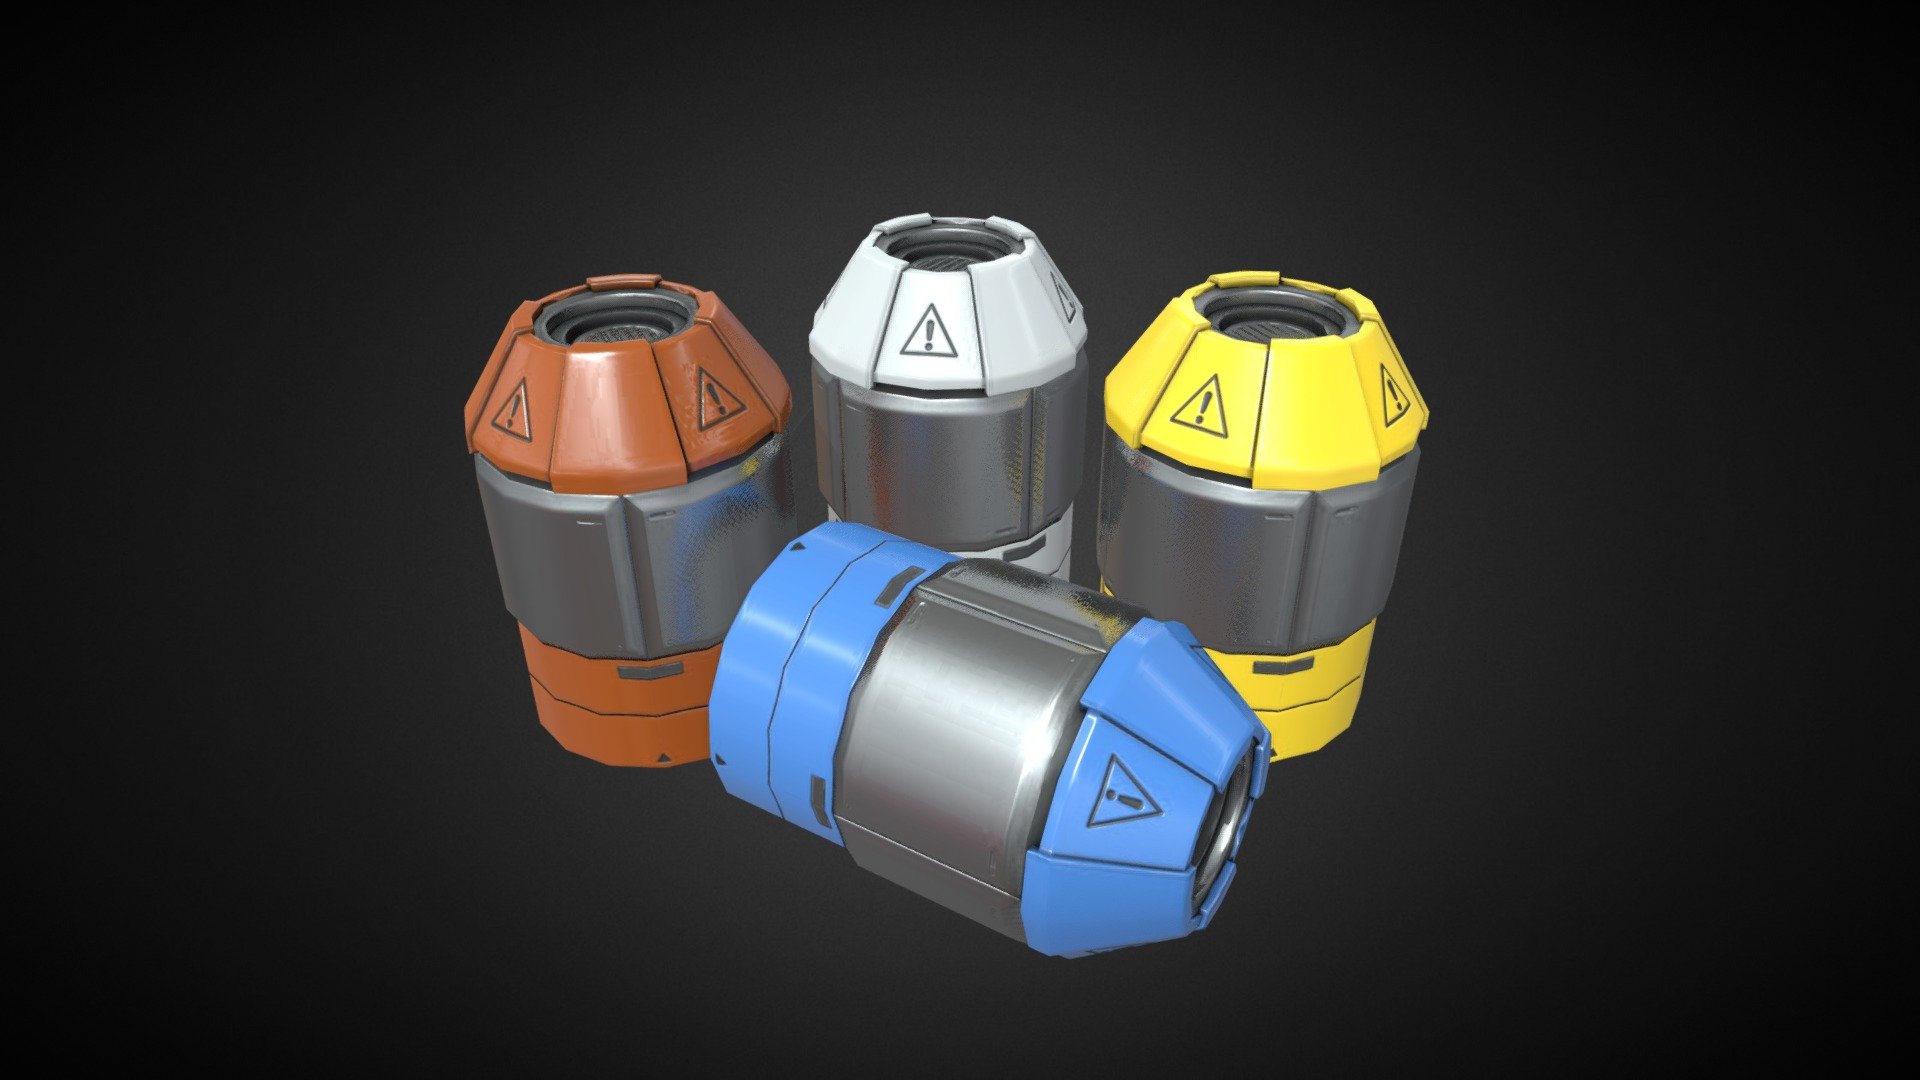 Hard surface SciFi Cylinder Canisters. Great for holding all sorts of secrets and/or reactive chemicals 3d model